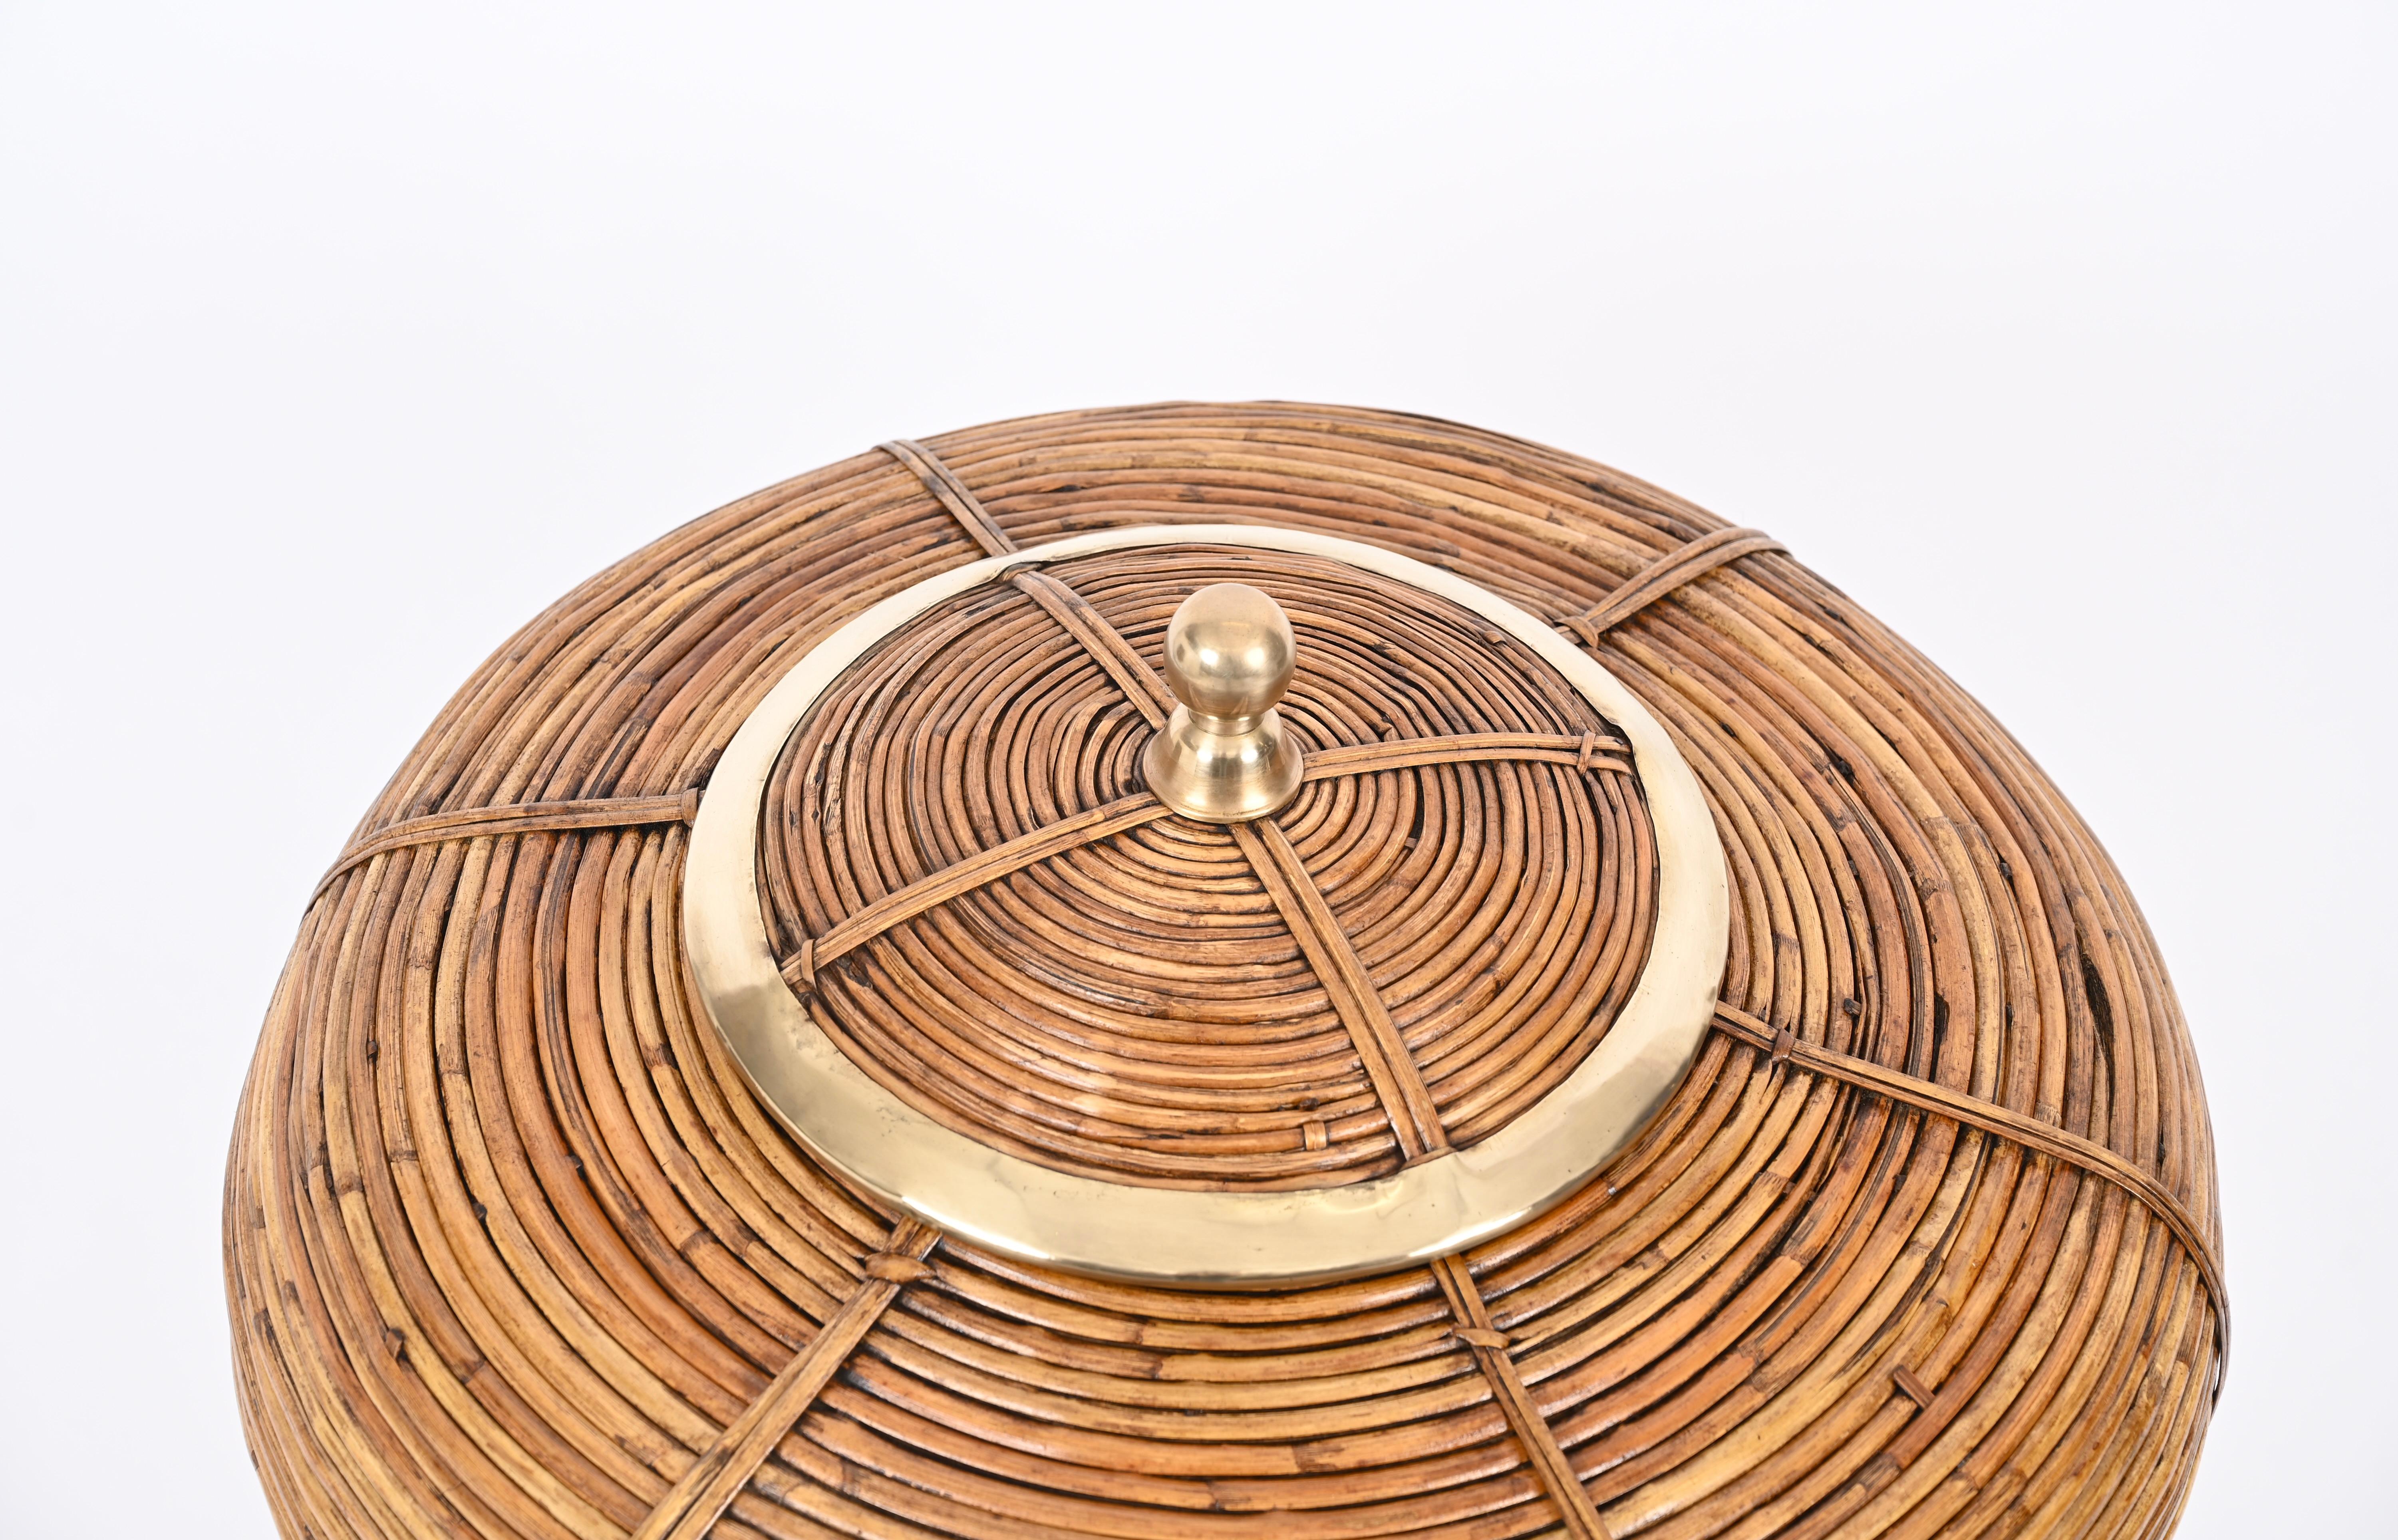 Hand-Crafted French Riviera Huge Basket in Rattan, Brass, Gabriella Crespi Style Italy 1970s For Sale